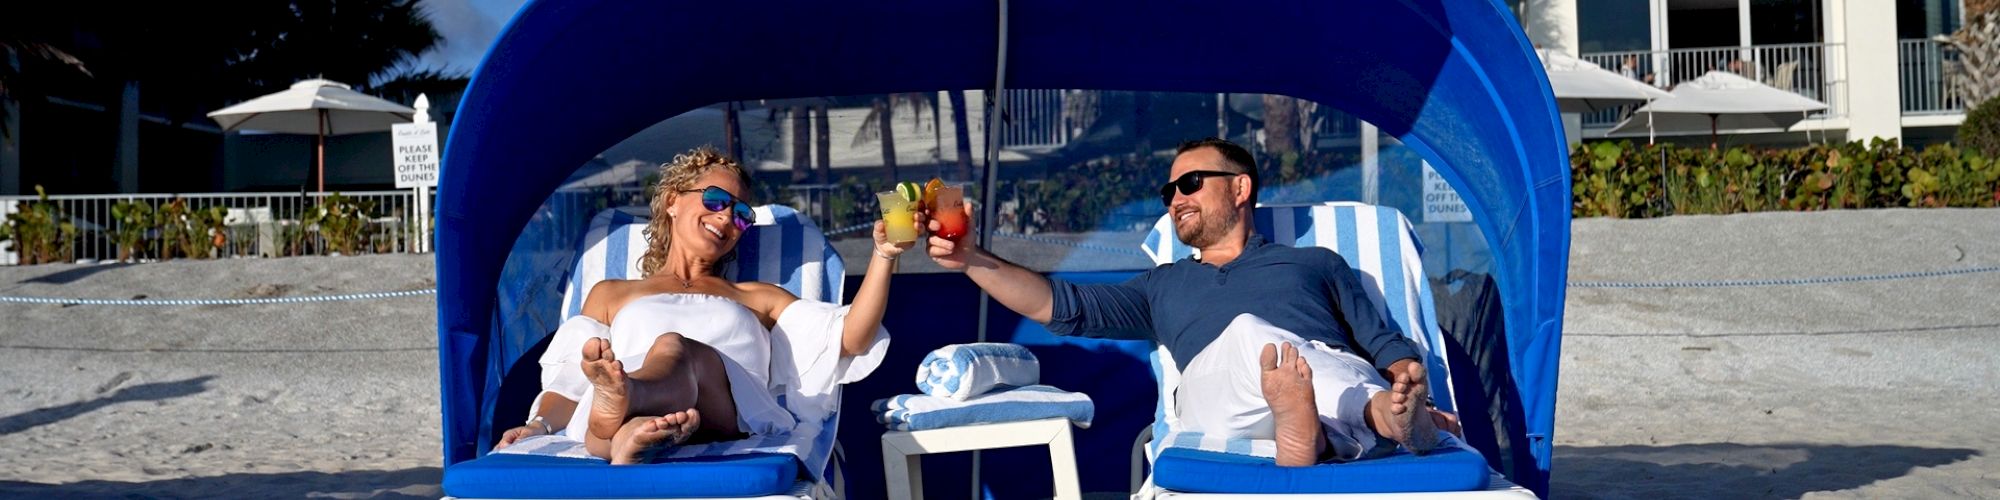 Two people are relaxing on beach chairs under a canopy, toasting drinks, with a beach and building in the background.